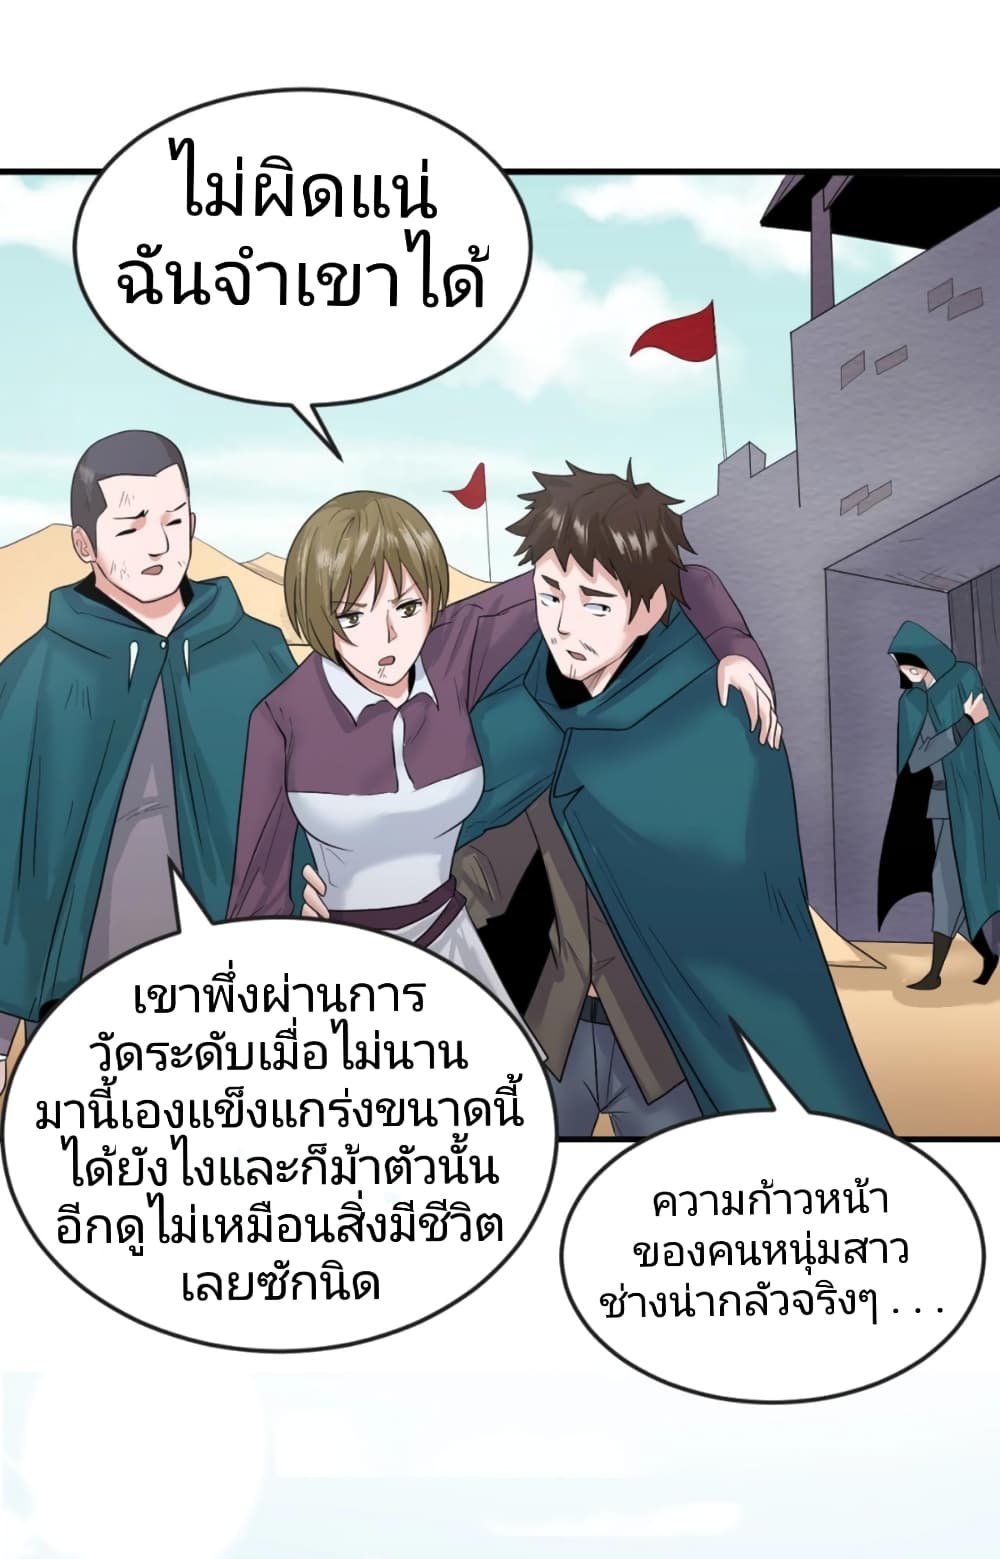 The Age of Ghost Spirits à¸à¸­à¸à¸à¸µà¹ 28 (14)